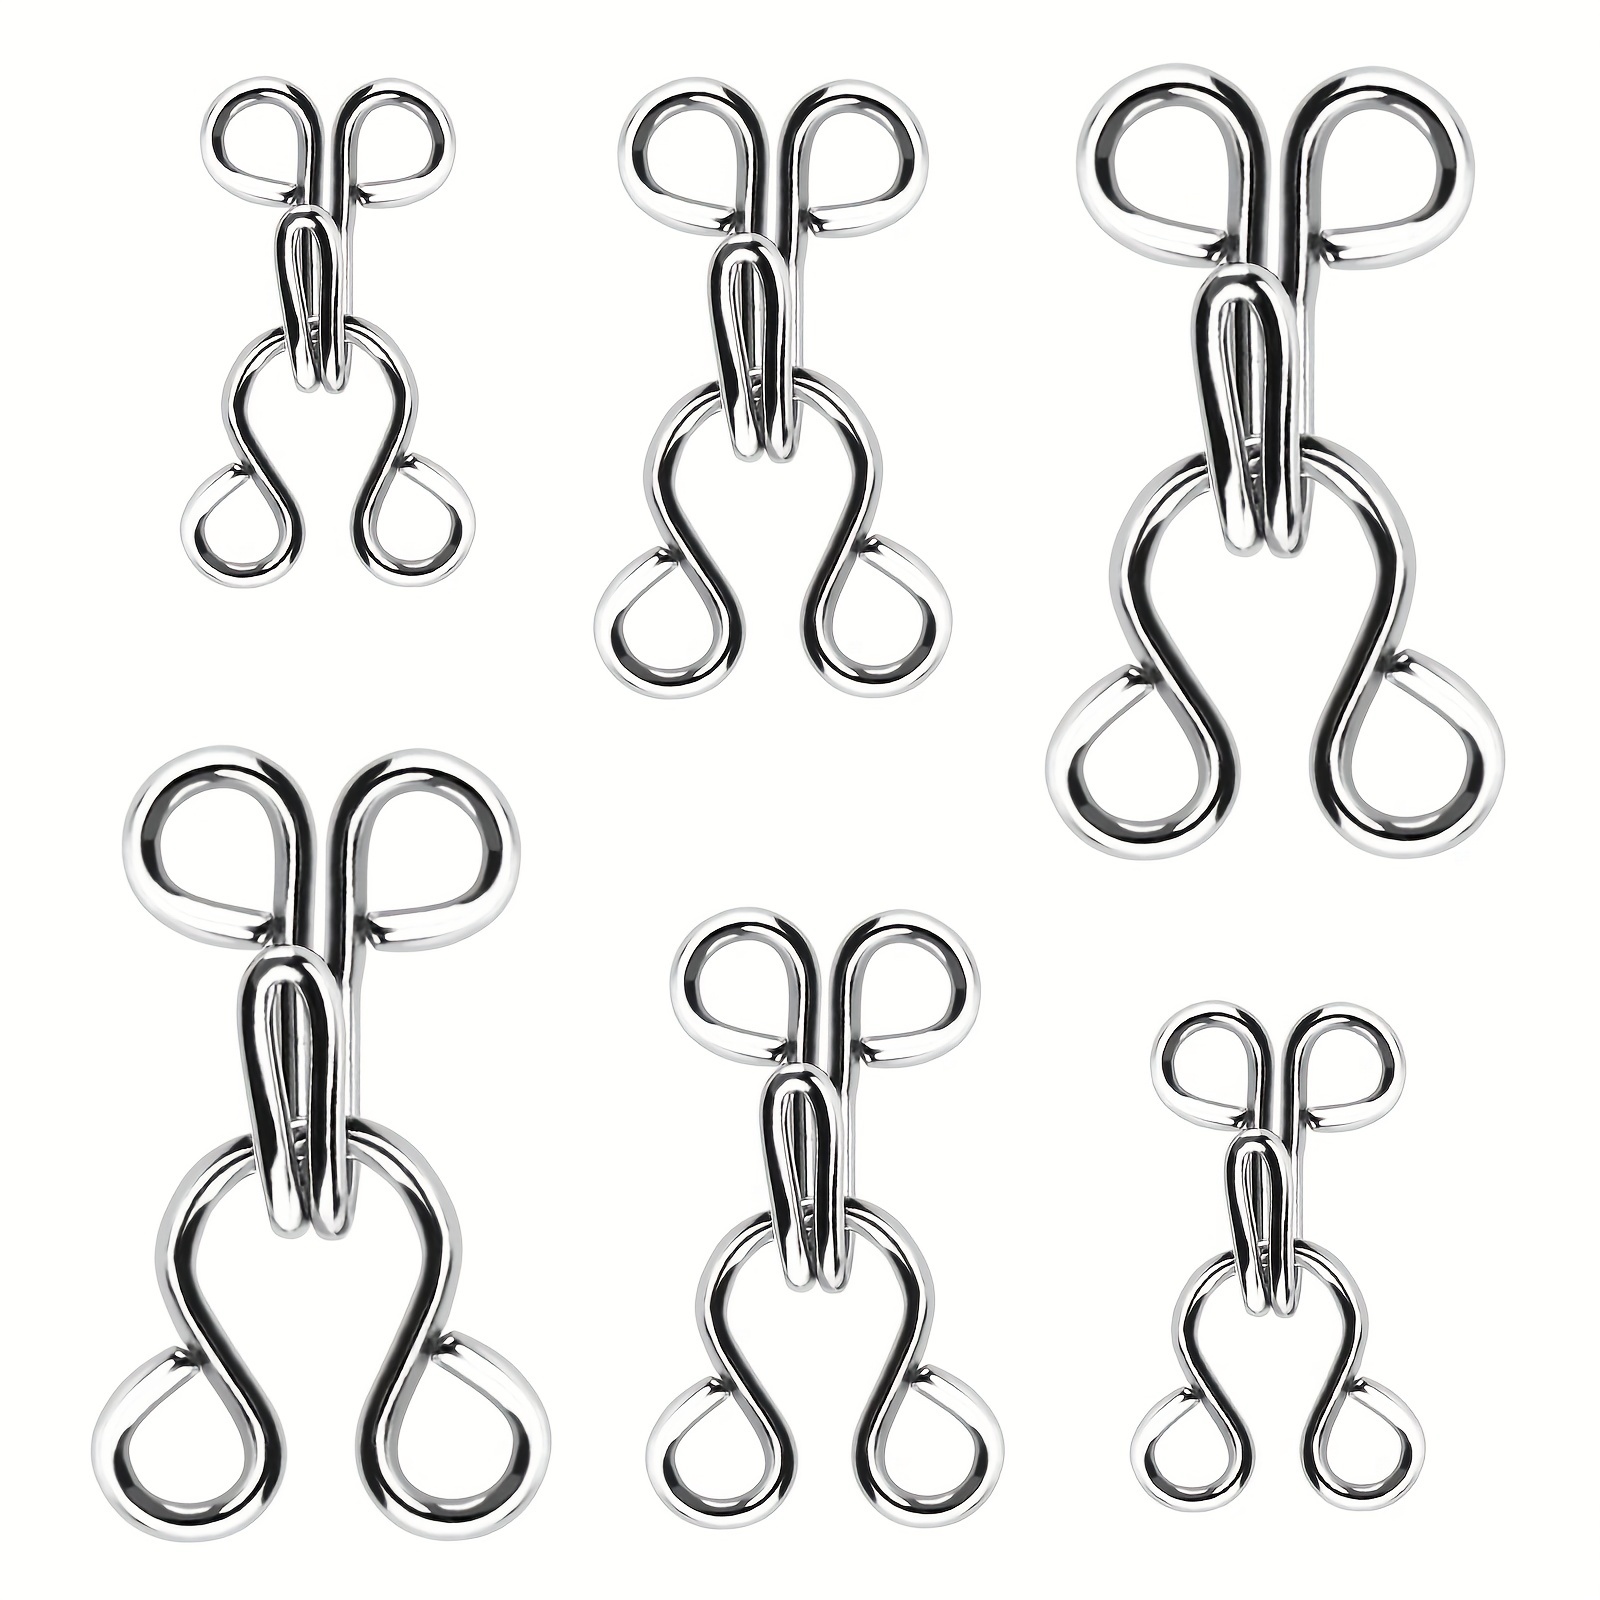 24pcs Sewing Hook And Eye Latch For Clothing Bra Hooks Replacement